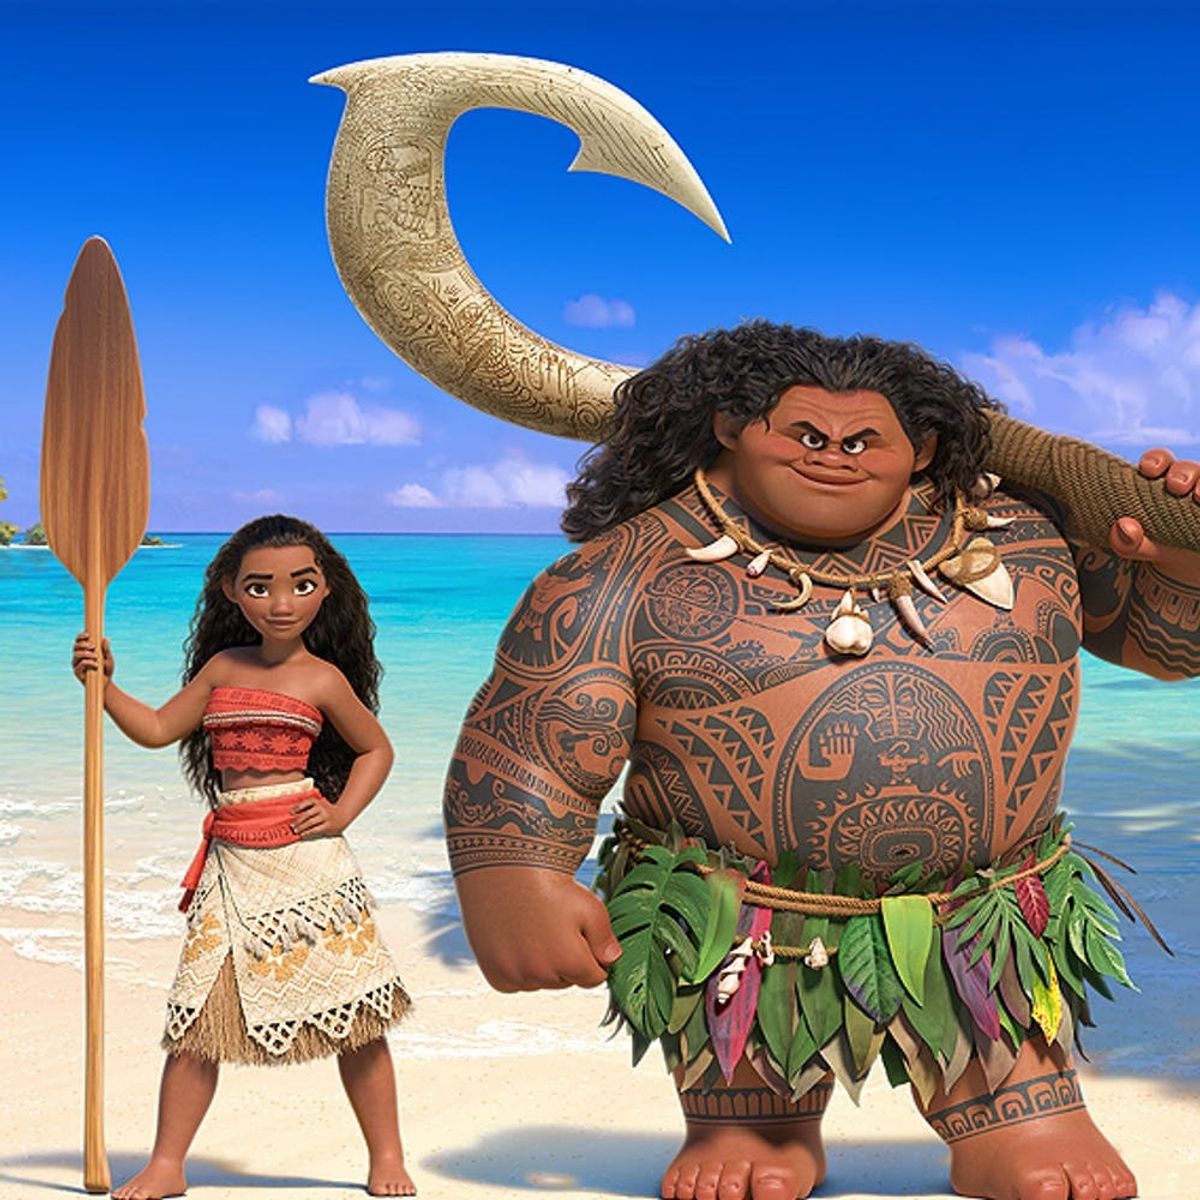 Disney Fans Are Upset About Moana for This Unexpected Reason